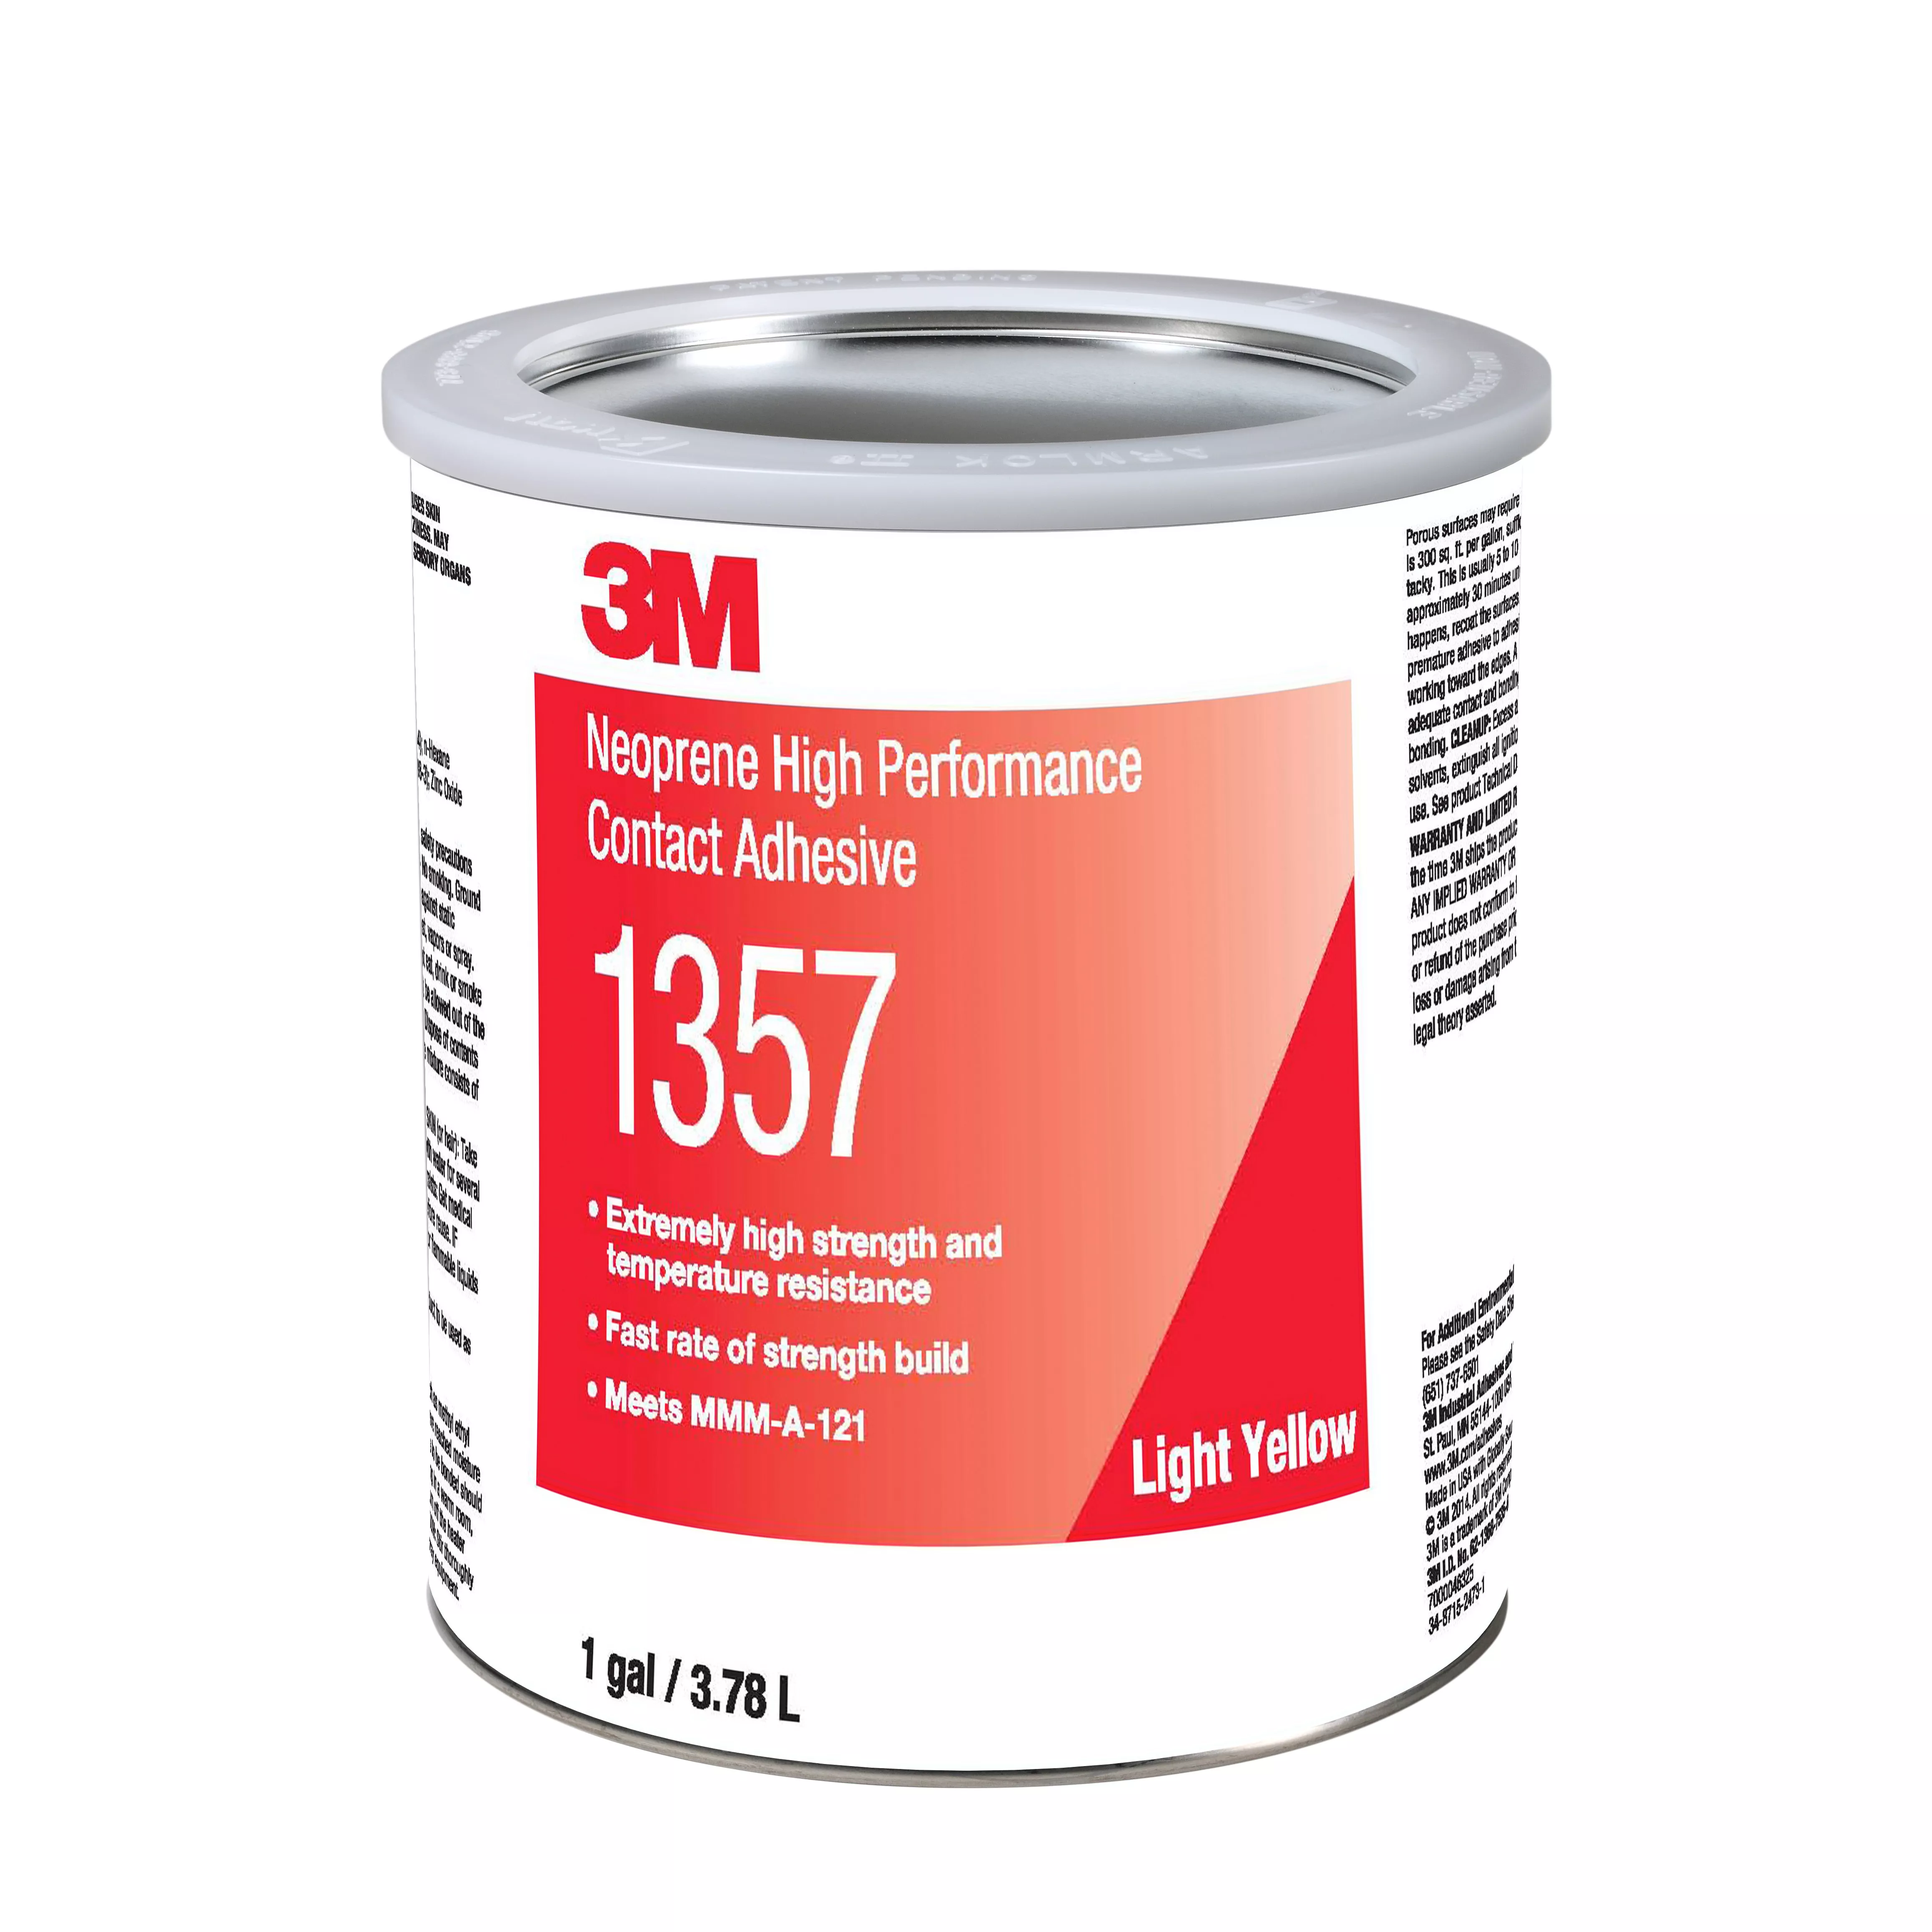 3M™ Neoprene High Performance Contact Adhesive 1357, Light Yellow, 1
Gallon, 4 Can/Case